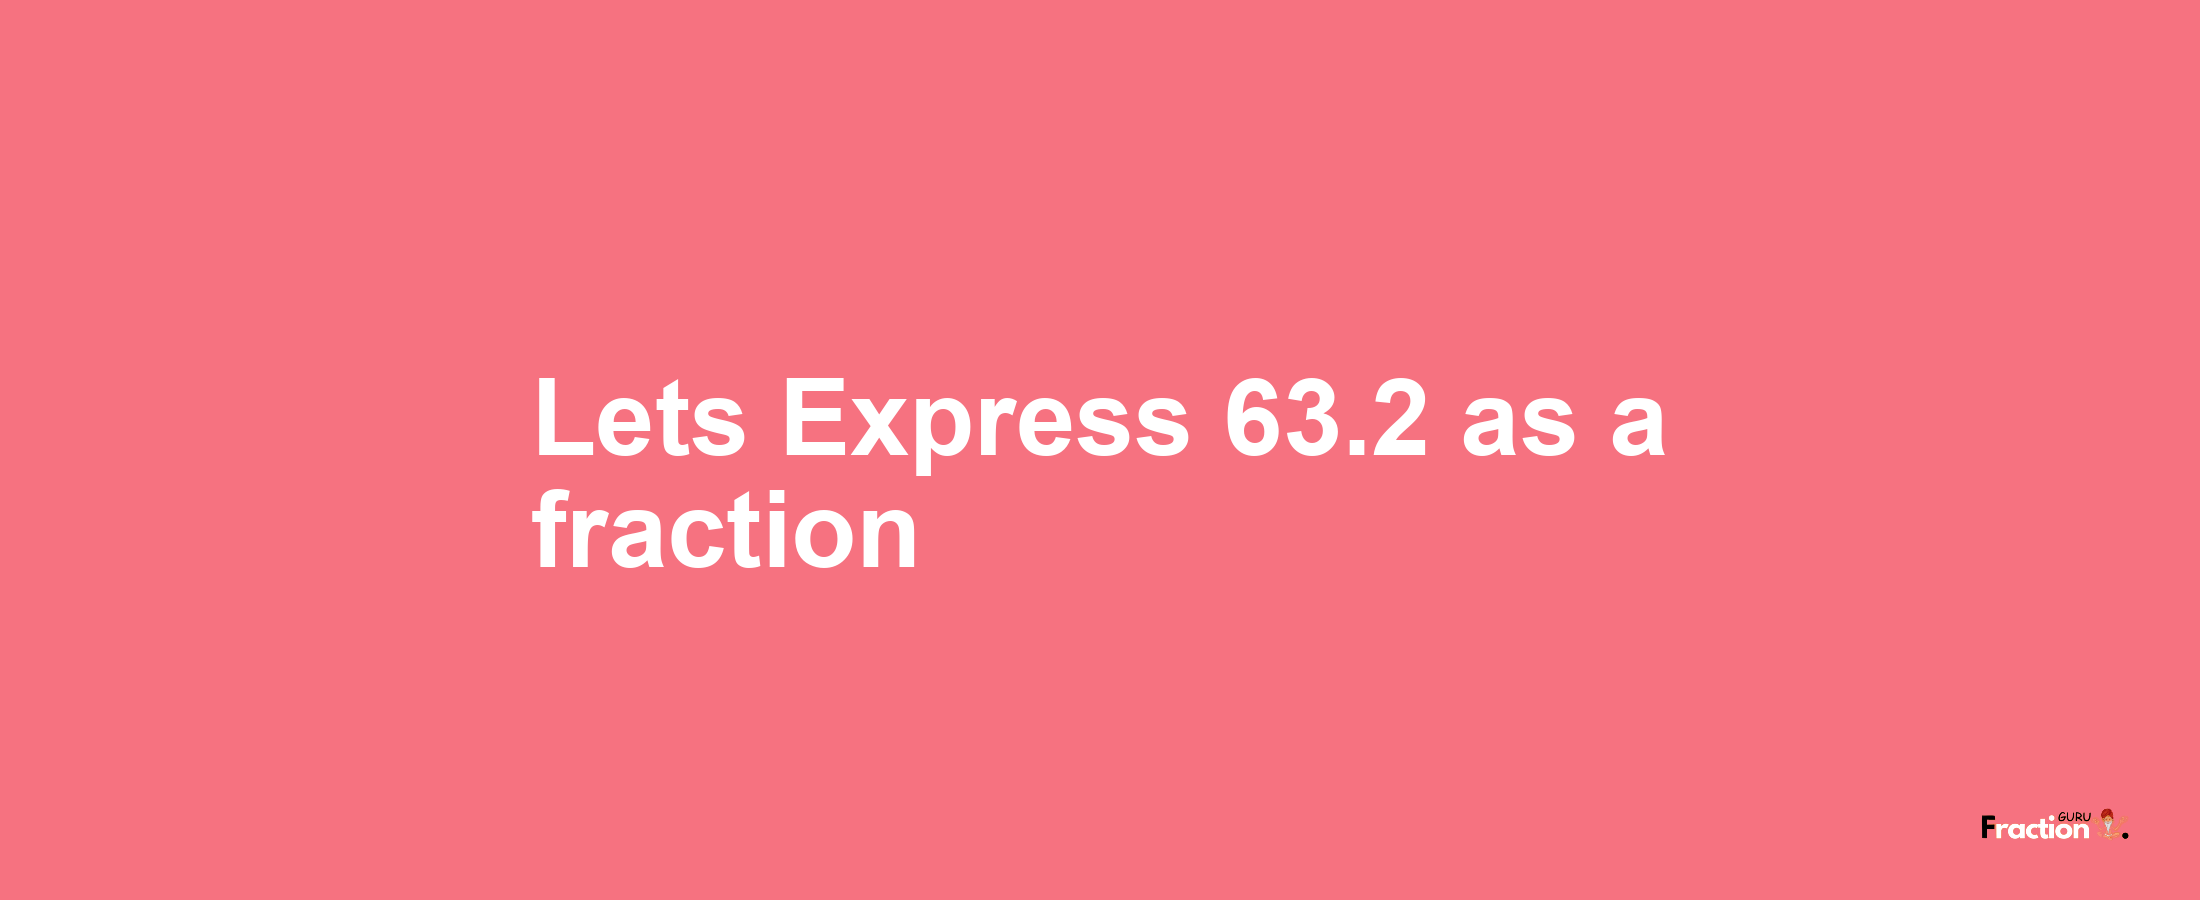 Lets Express 63.2 as afraction